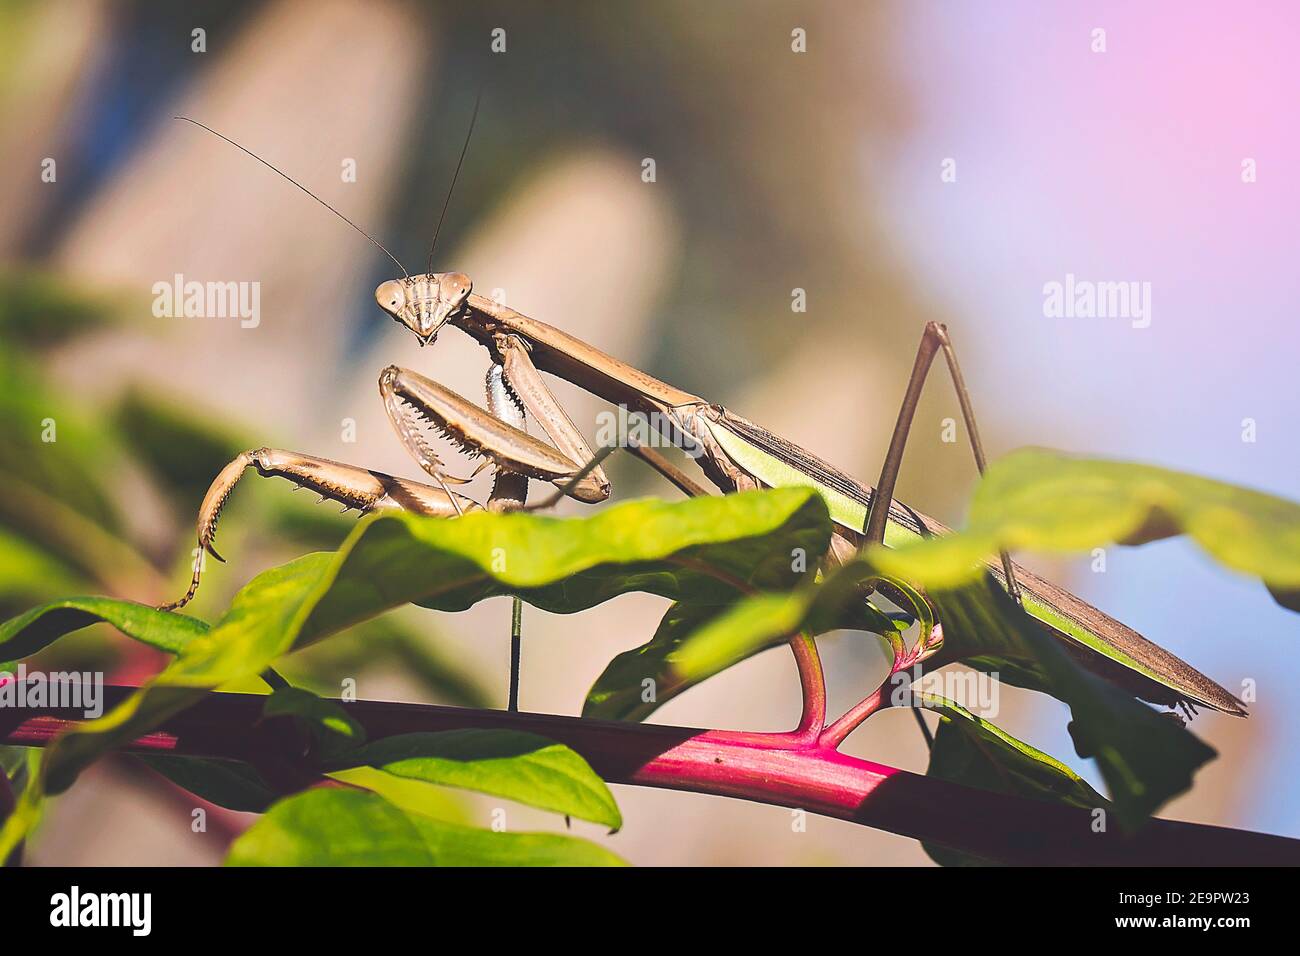 Praying Mantis Insect Horizontally On Green Vine With Direct Gaze Stock Photo